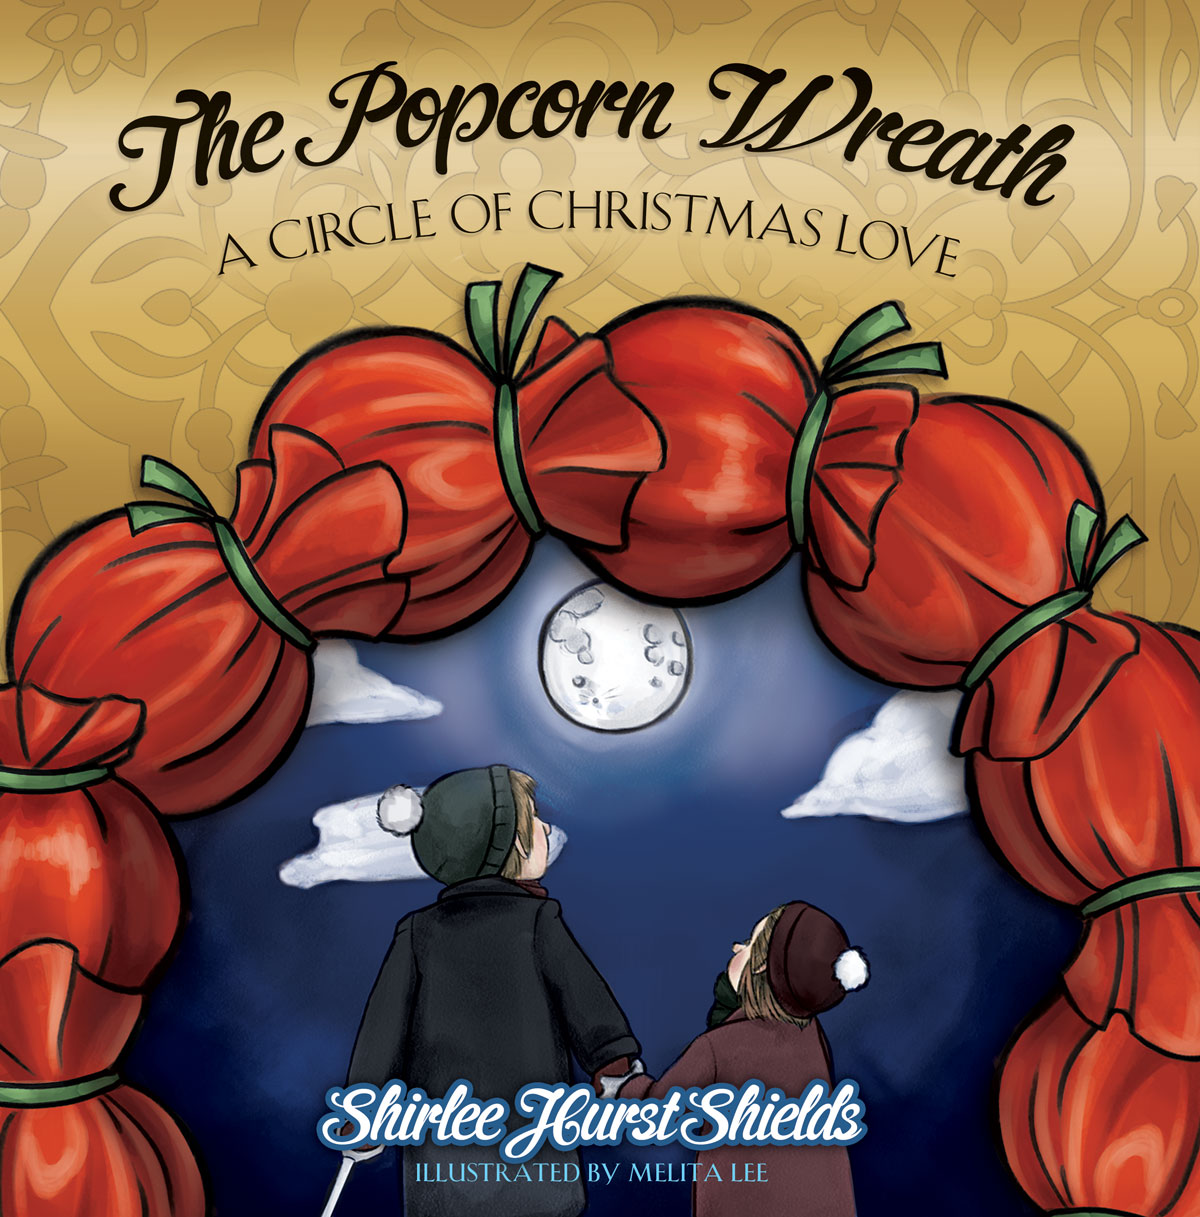 The Popcorn Wreath • A Circle of Christmas Love